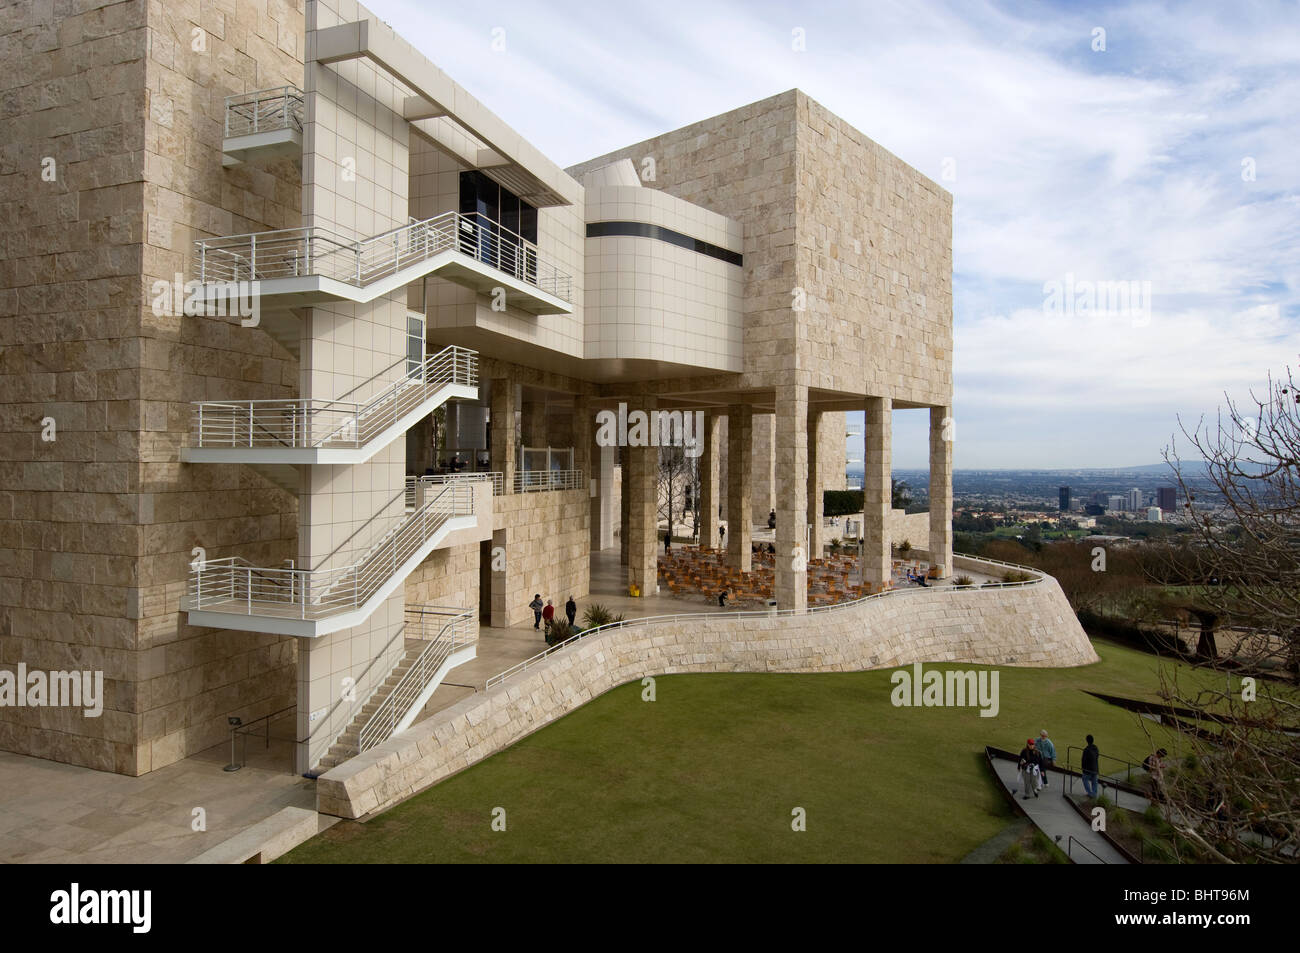 The Getty Center for the Arts in Los Angeles Stock Photo